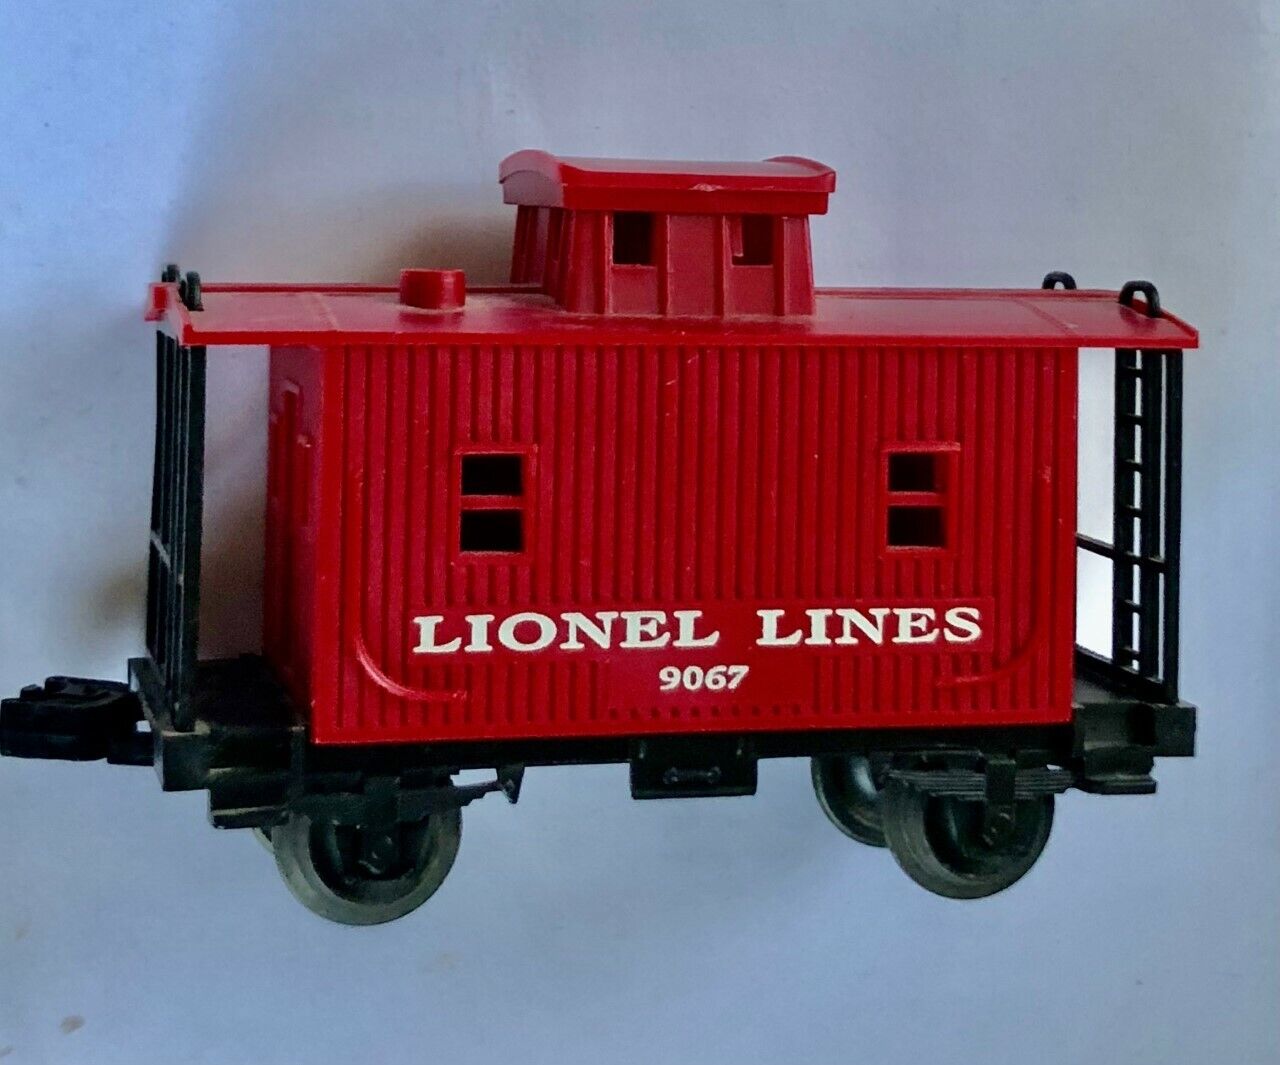 Lionel 4 Wheel Caboose Back Yard Playhouse Project Storage Shed Woodworking RR